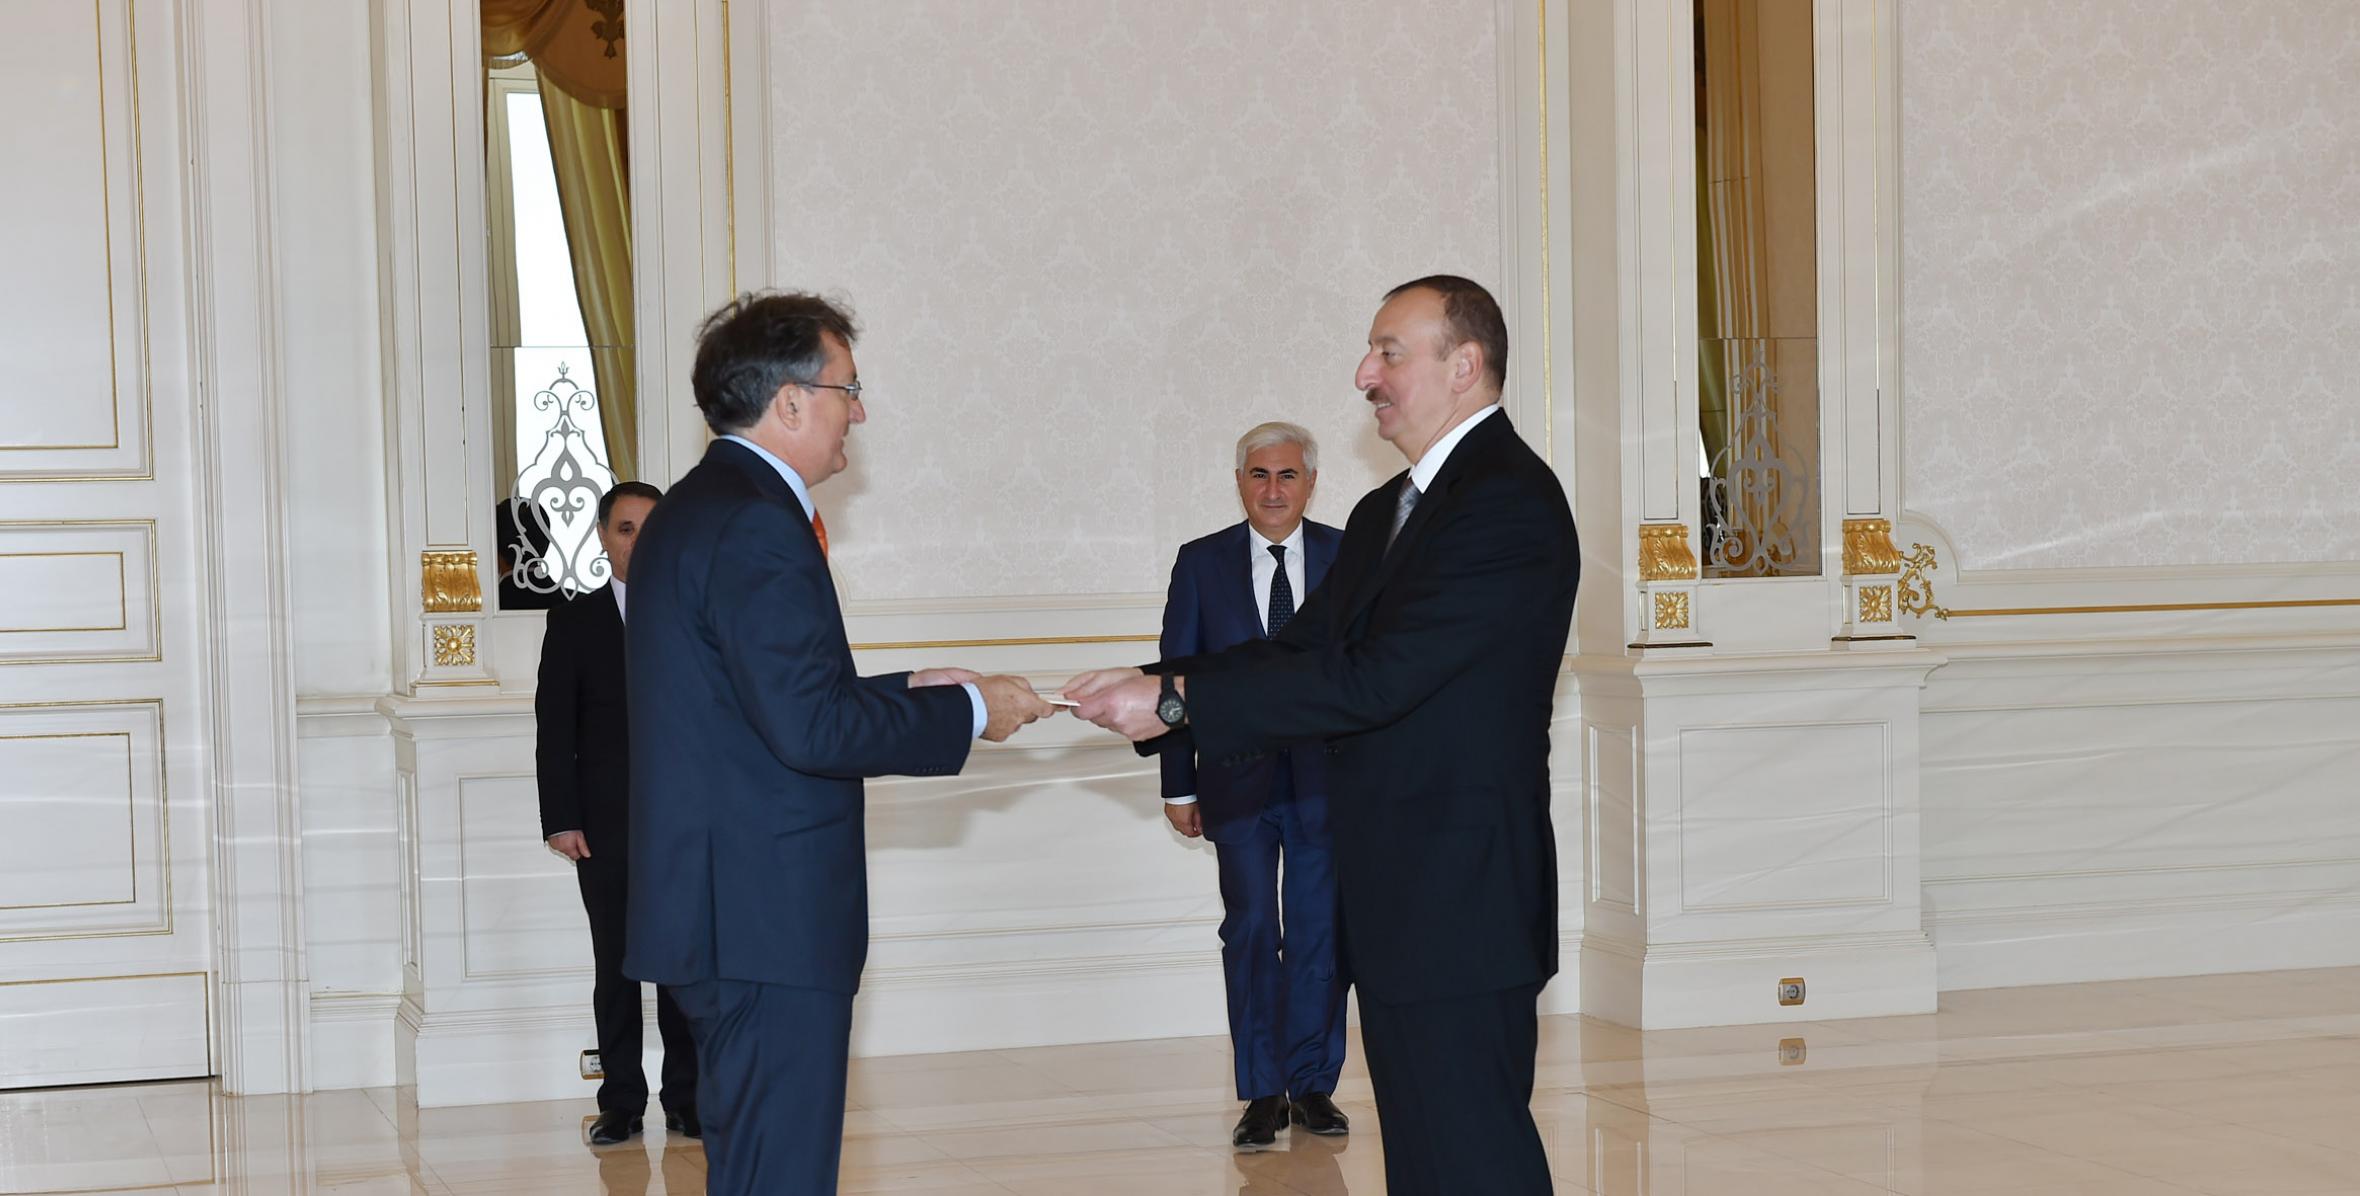 Ilham Aliyev received the credentials of the newly-appointed Serbian Ambassador